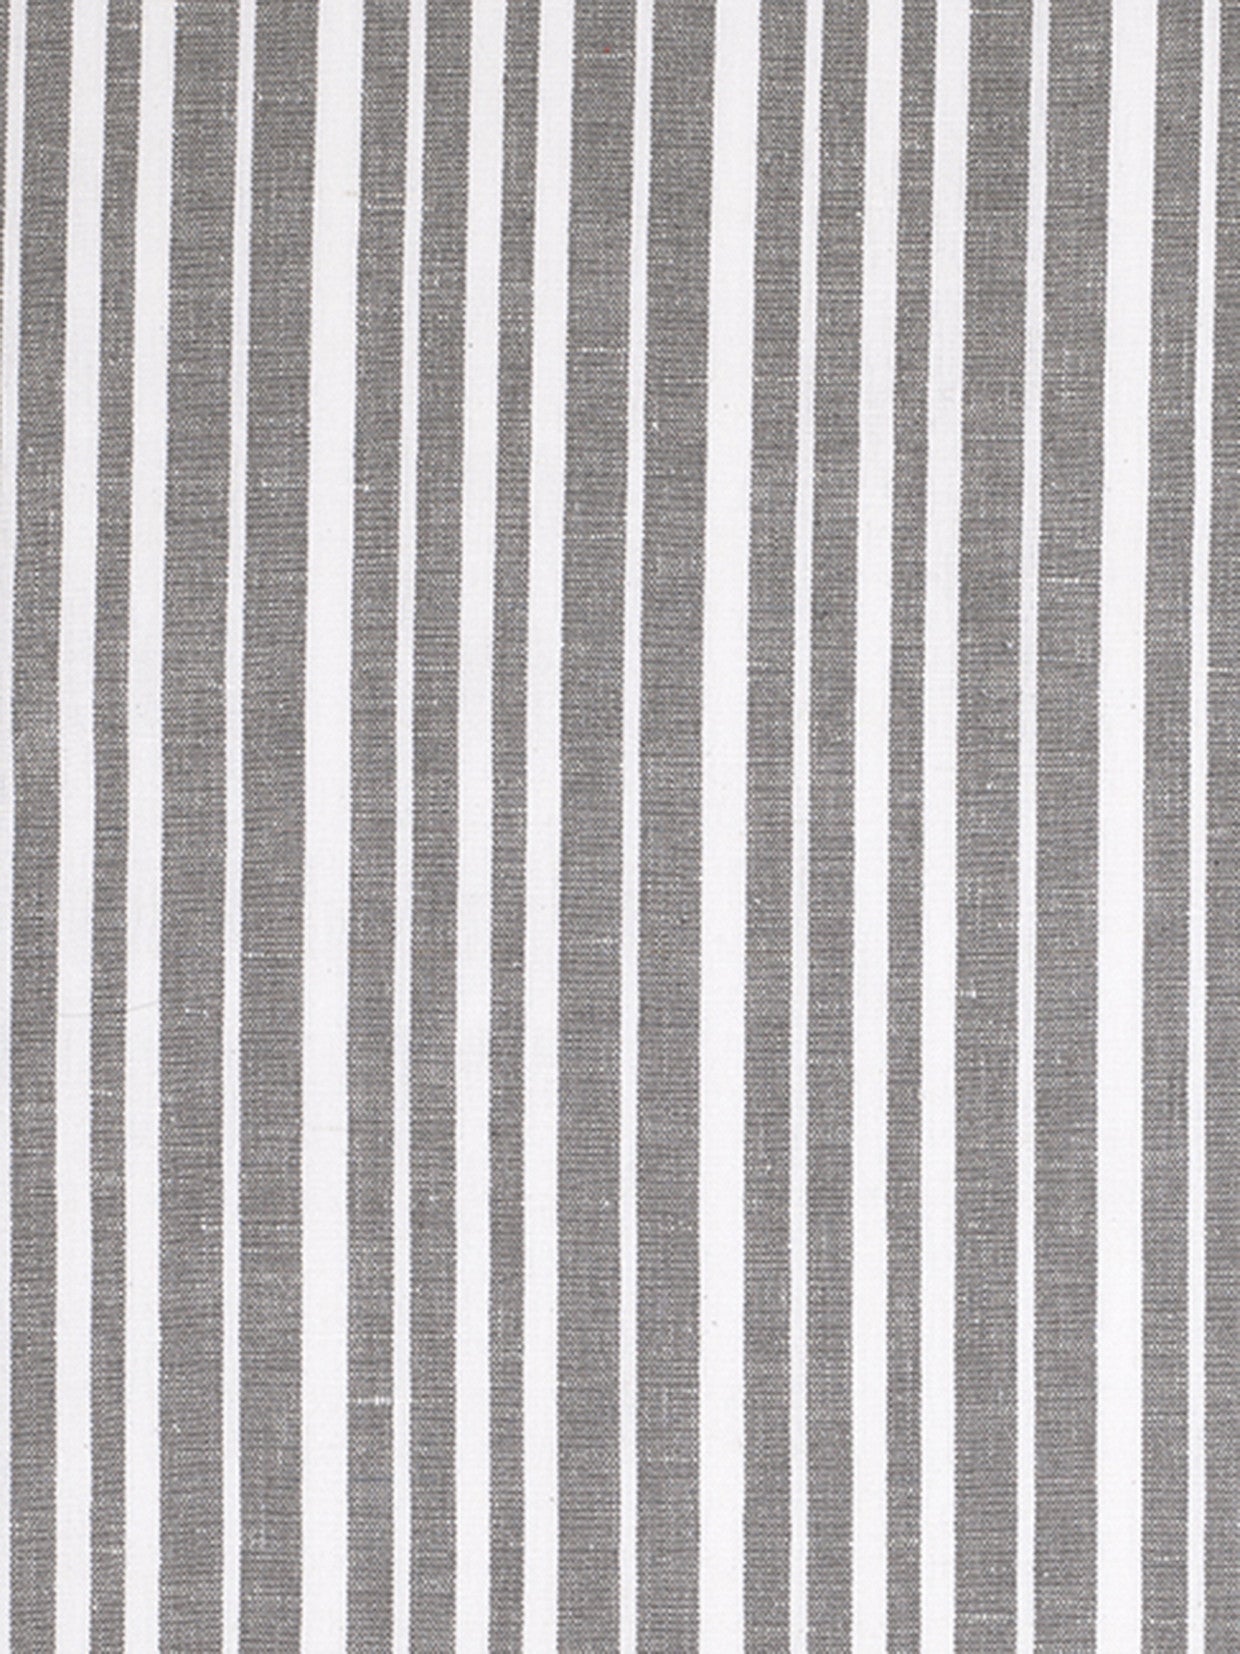 Palermo Ticking Stripe Home Decor Fabric by the Meter Stone Grey 